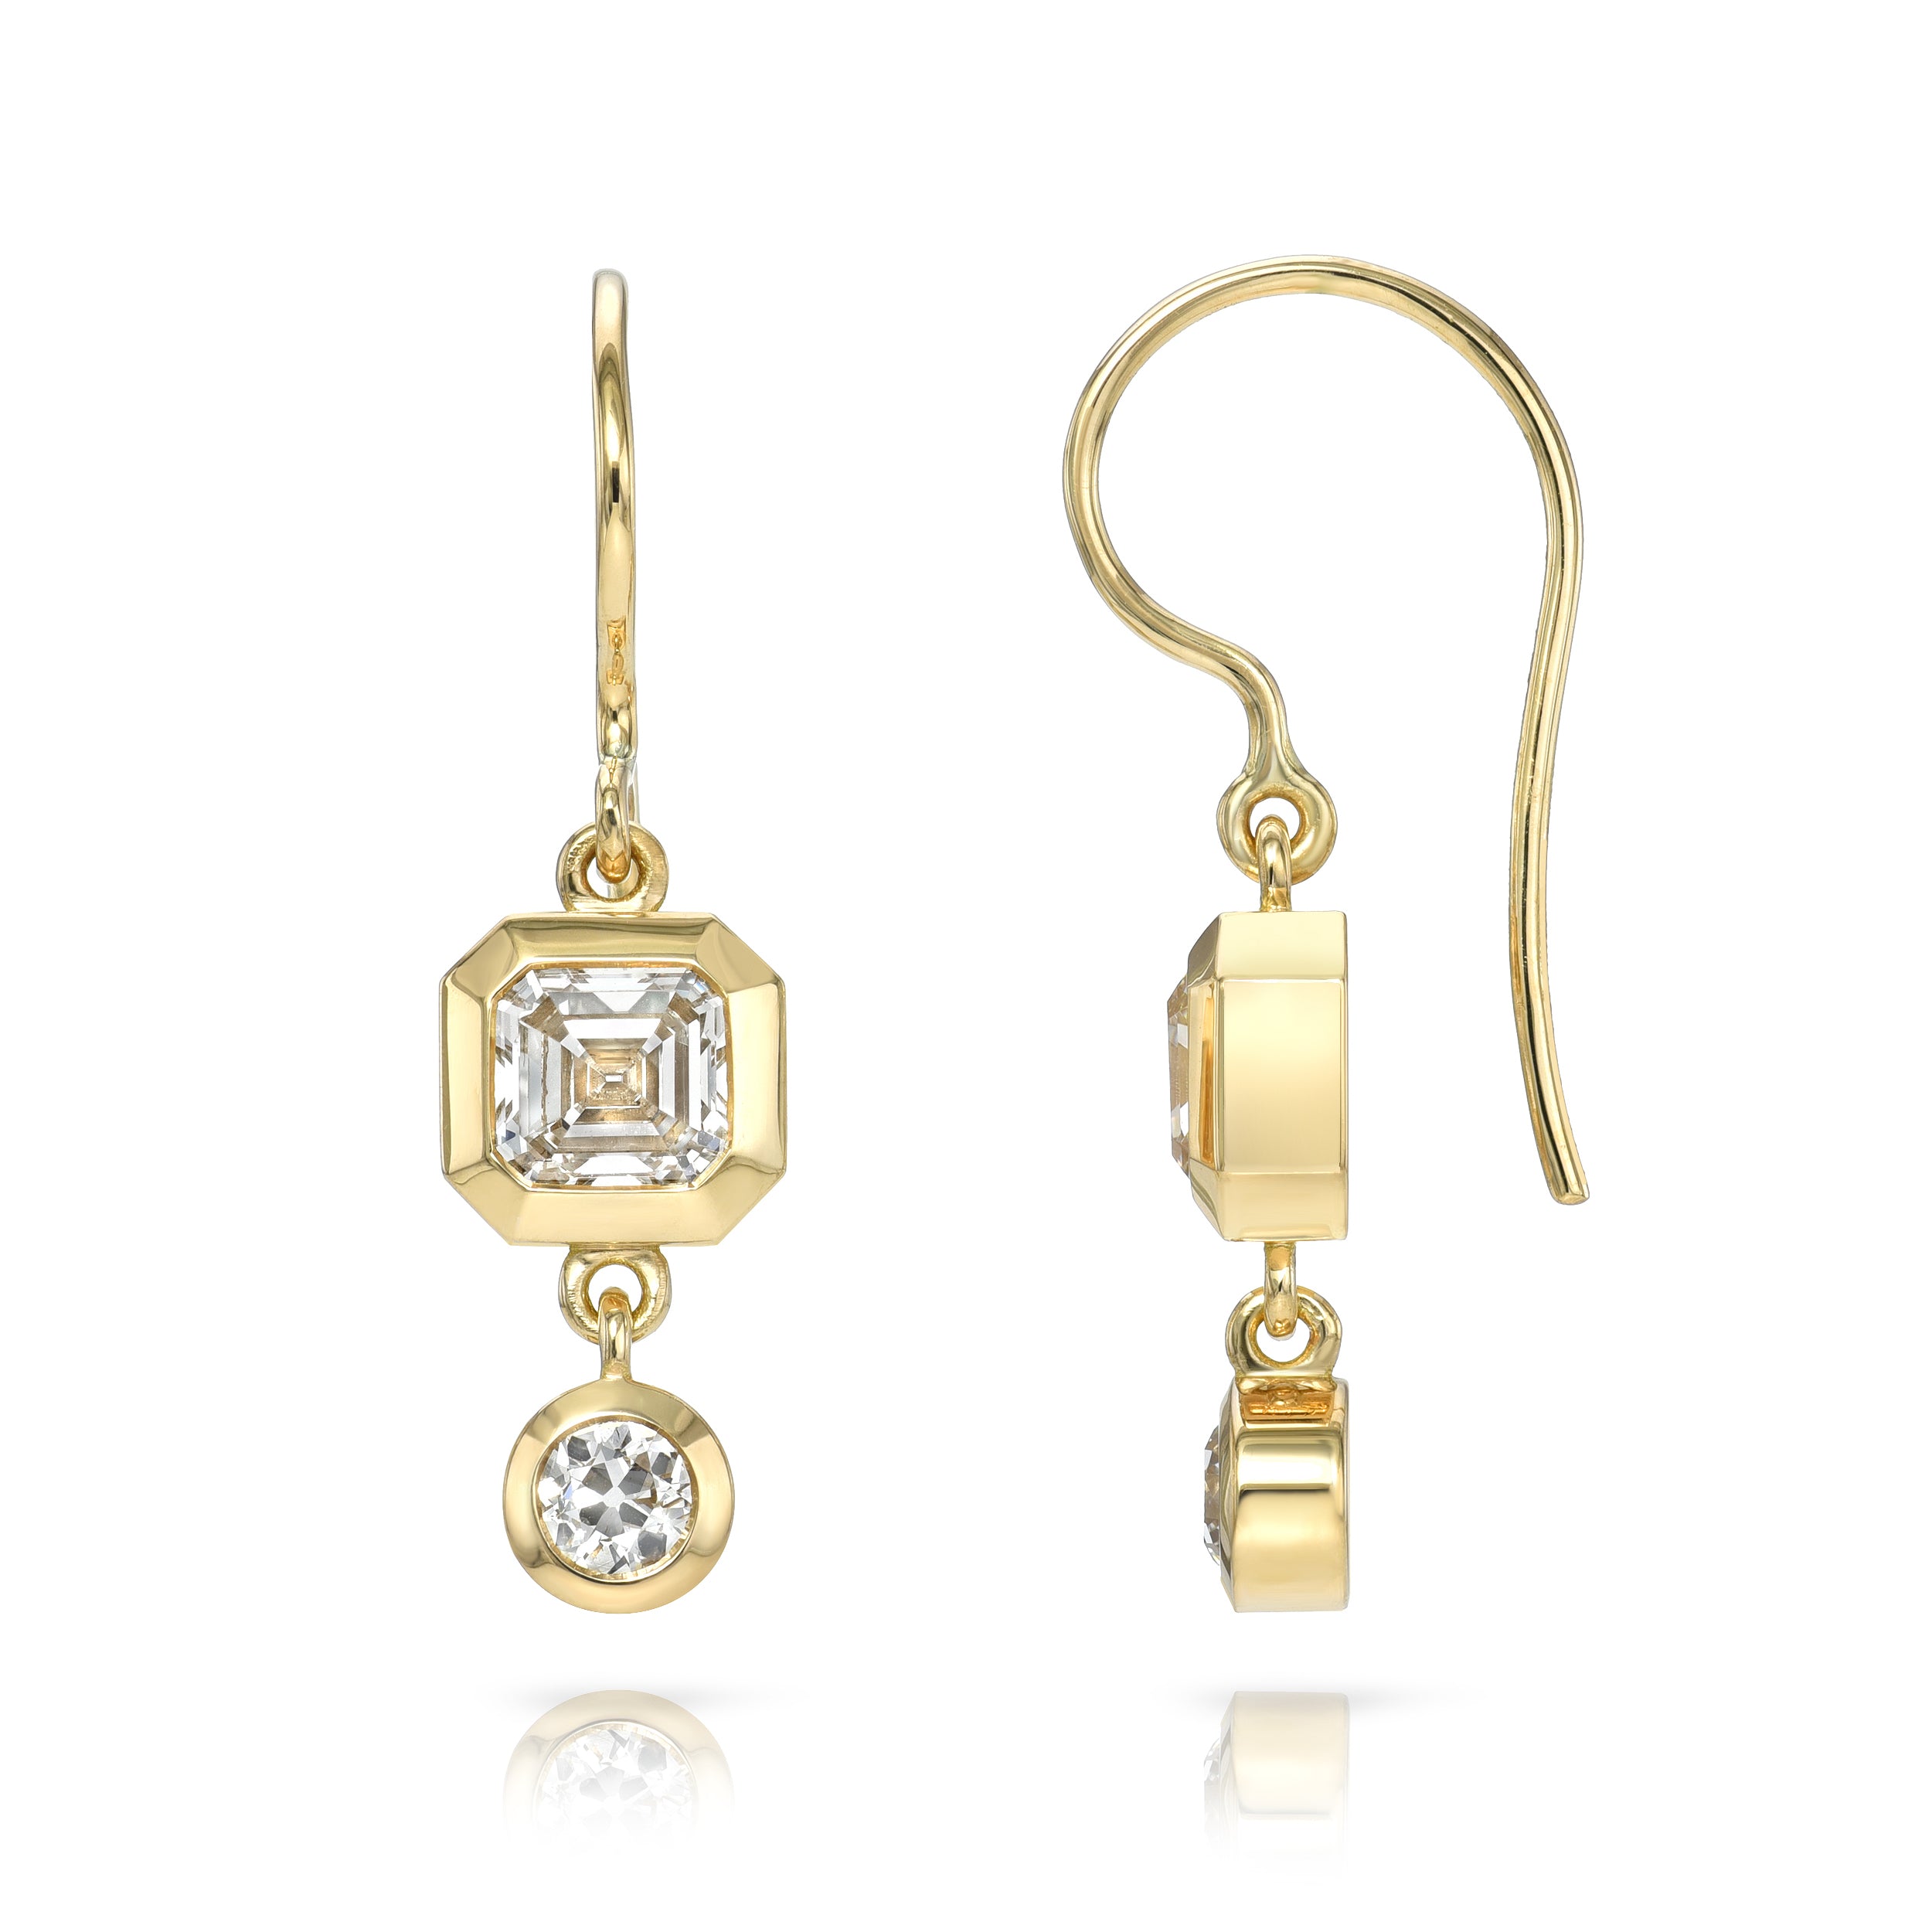 SINGLE STONE PALOMA DOUBLE DROPS | Earrings featuring 2.06ctw K/VS2 GIA certified emerald cut diamonds with 0.43ctw G-H/VS old European cut accent diamonds bezel set in handcrafted 18K yellow gold double drop earrings.